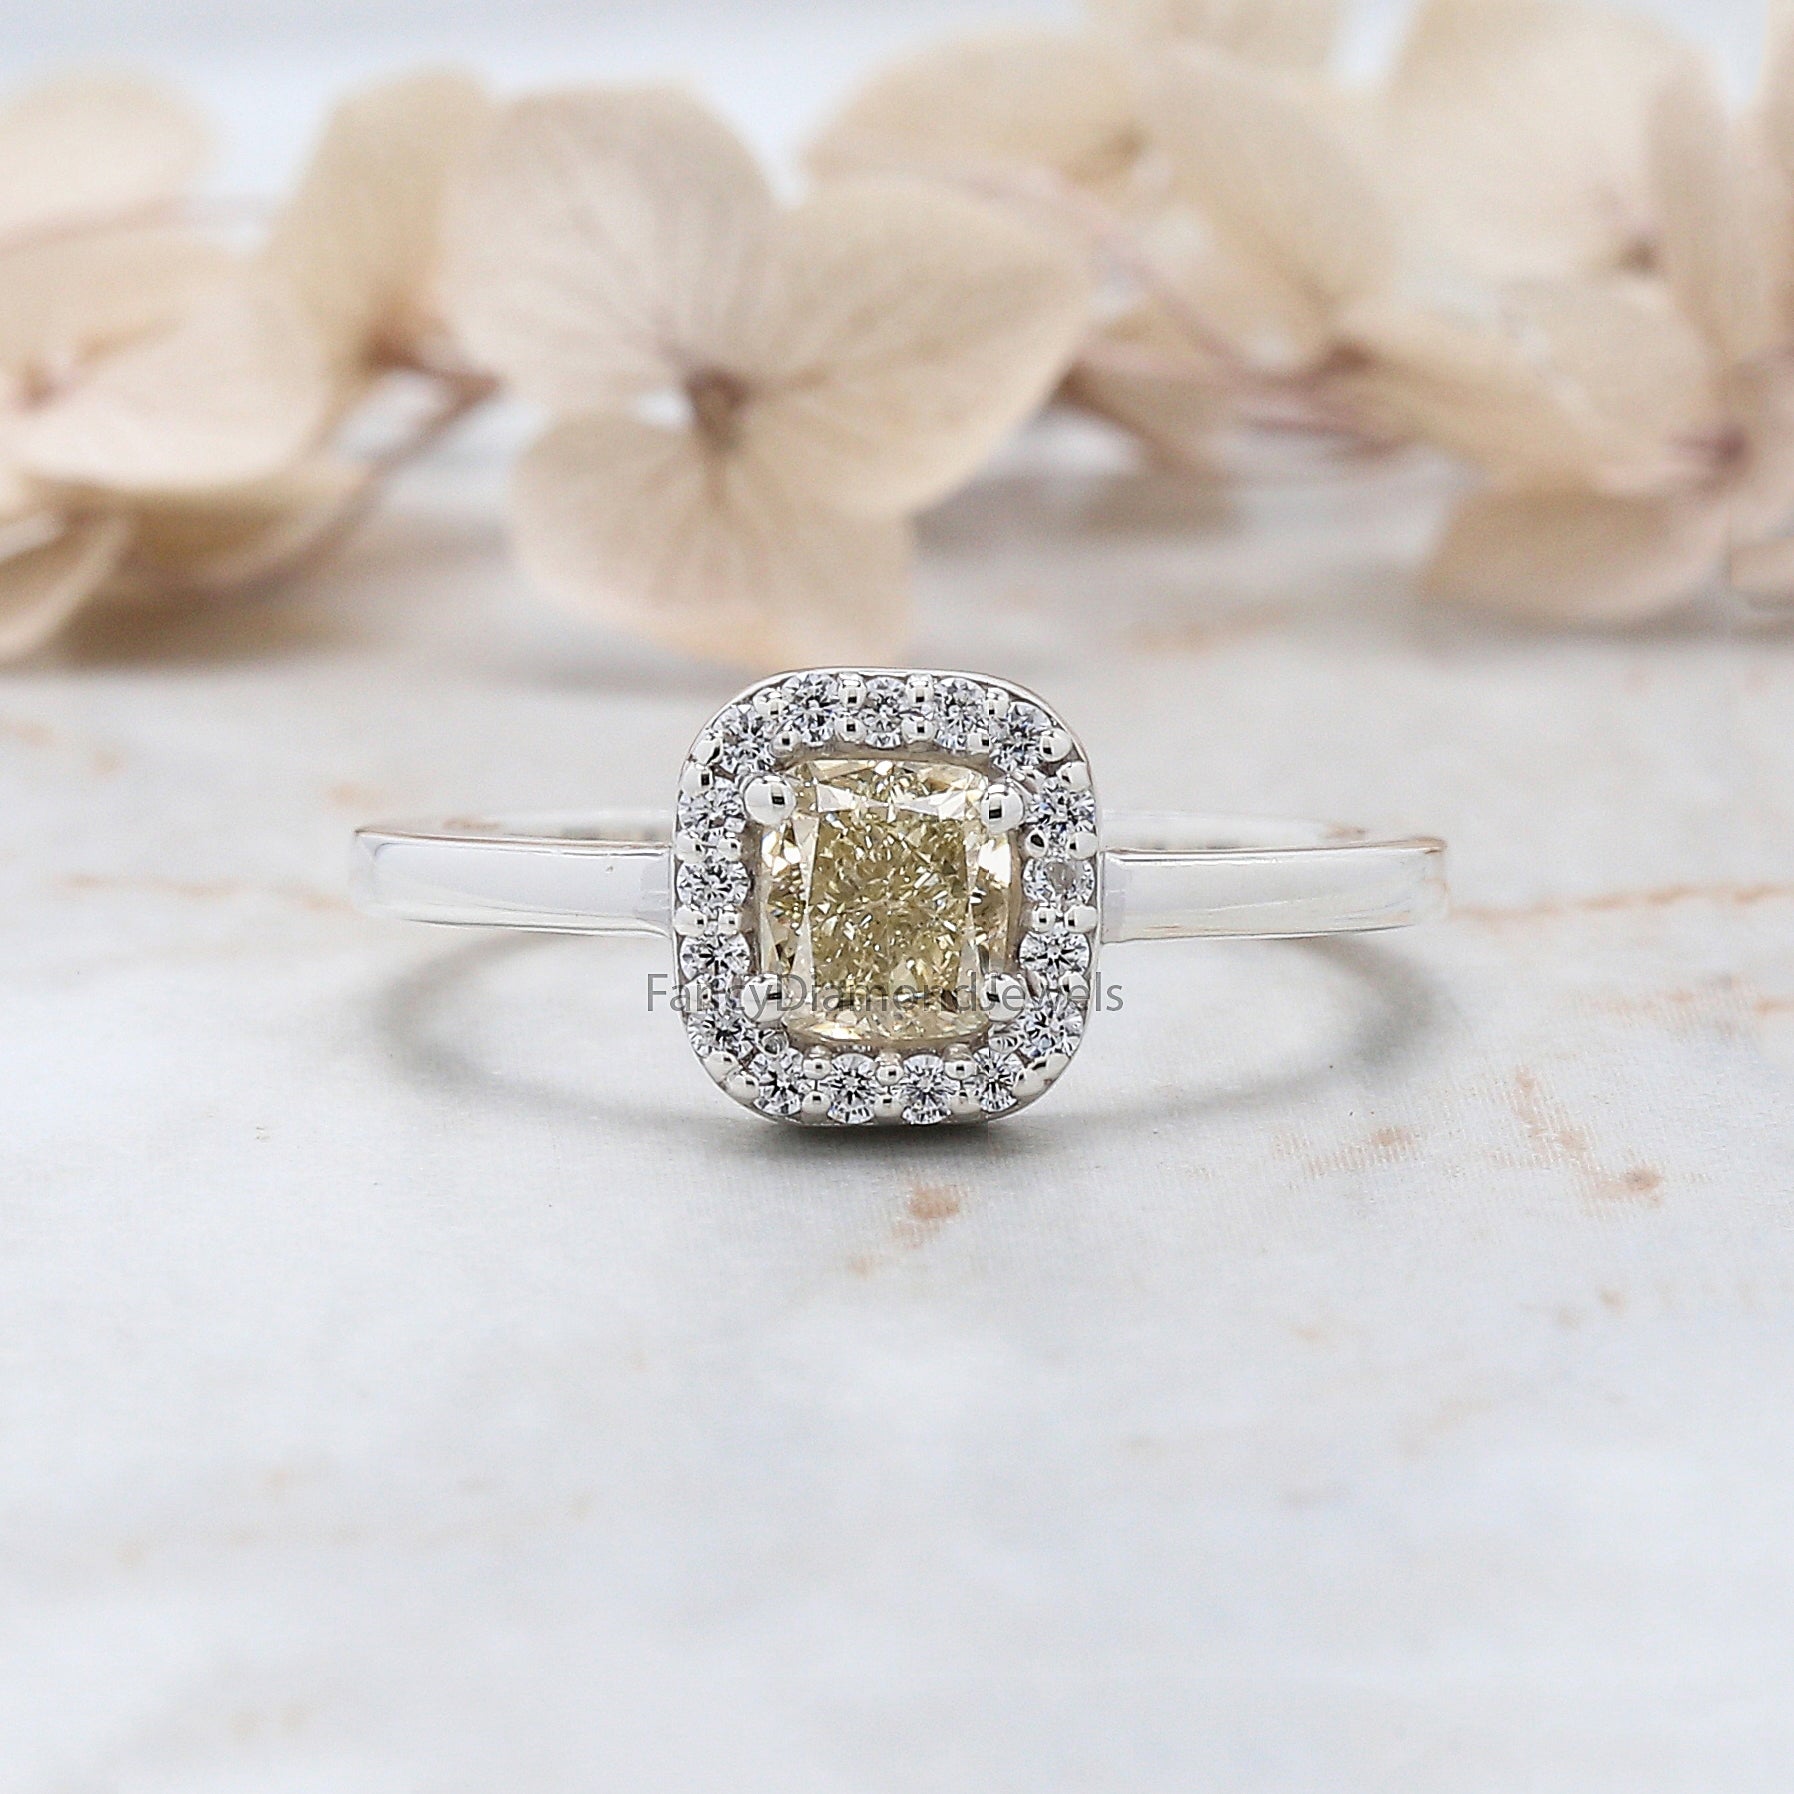 Cushion Cut Yellow Color Diamond Ring 0.60 Ct 4.70 MM Cushion Diamond Ring 14K Solid White Gold Silver Engagement Ring Gift For Her QN9833